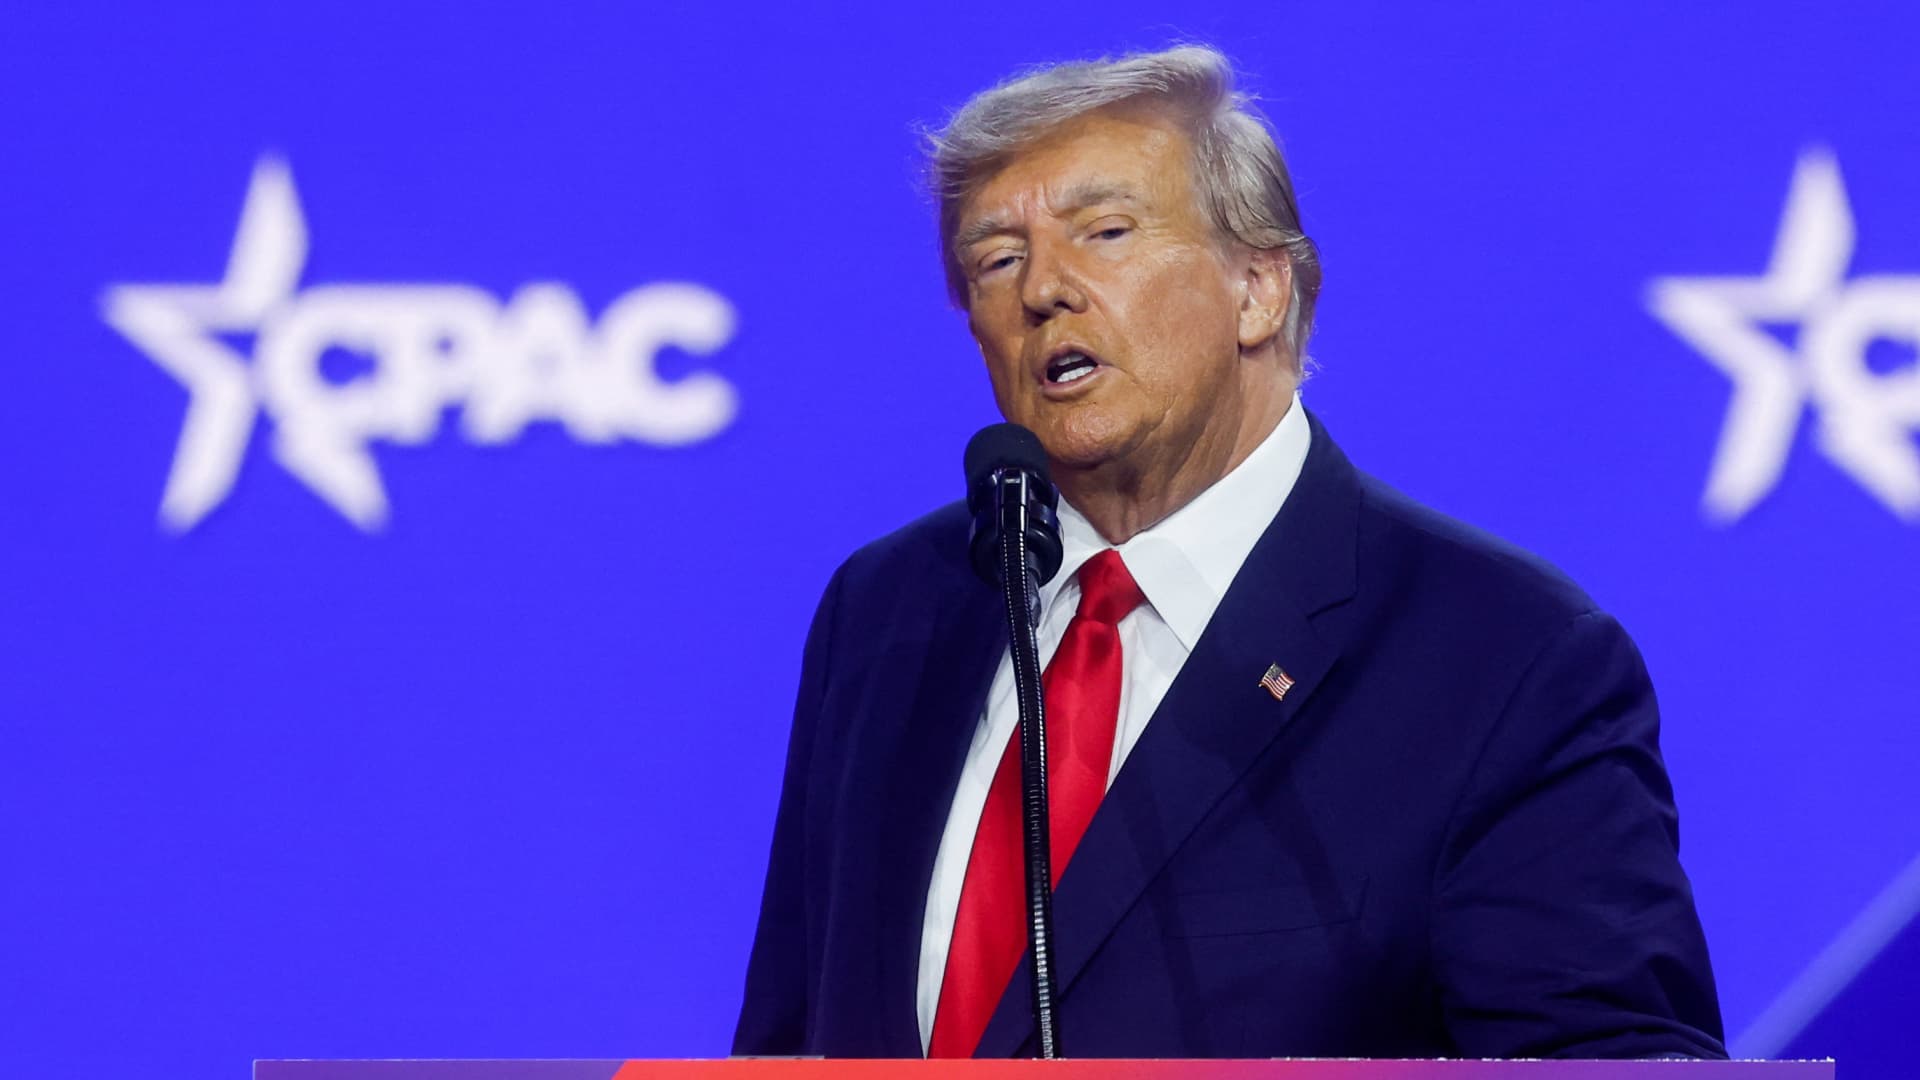 Former U.S. President Donald Trump attends the Conservative Political Action Conference (CPAC) at Gaylord National Convention Center in National Harbor, Maryland, U.S., March 4, 2023. 